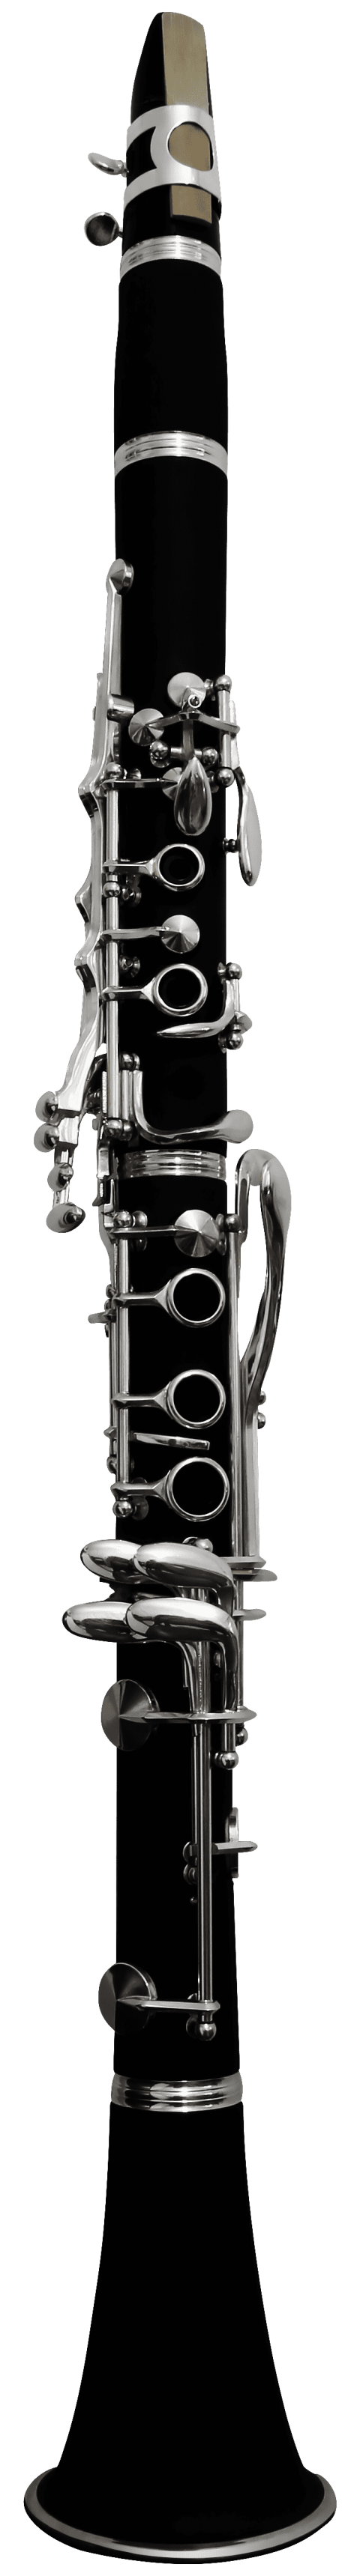 Clarinet clipart black and white. Png free images toppng